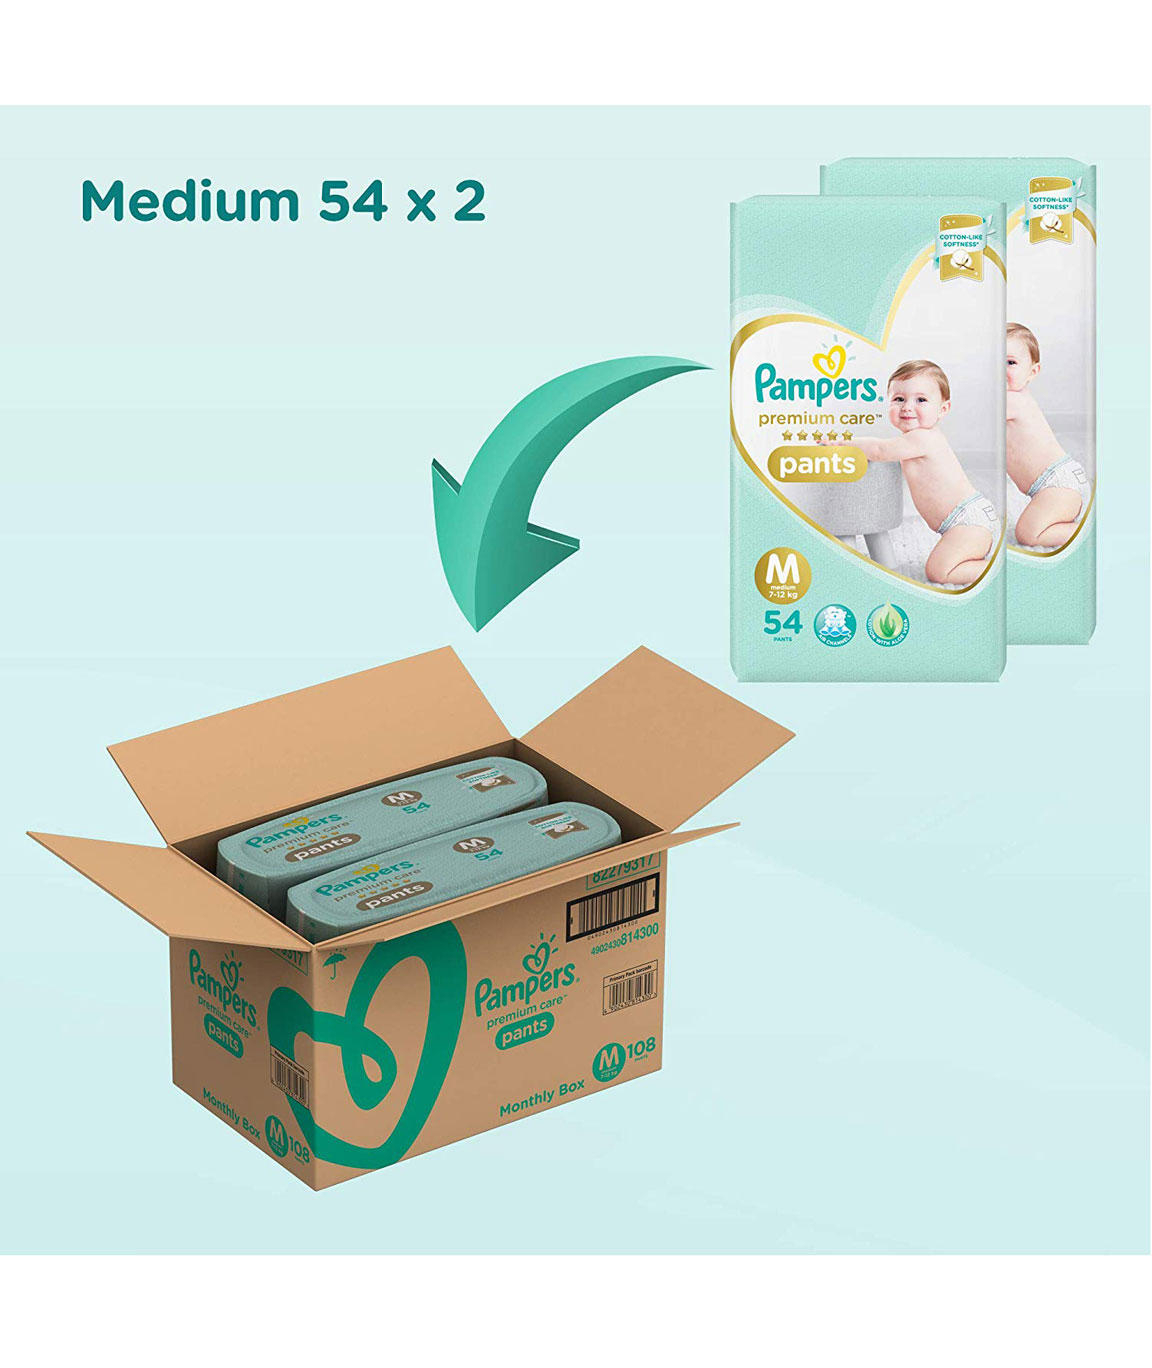 Pampers Premium Care Pants with Aloe Vera & Cotton-Like Softness | Size  Medium: Buy packet of 54.0 diapers at best price in India | 1mg